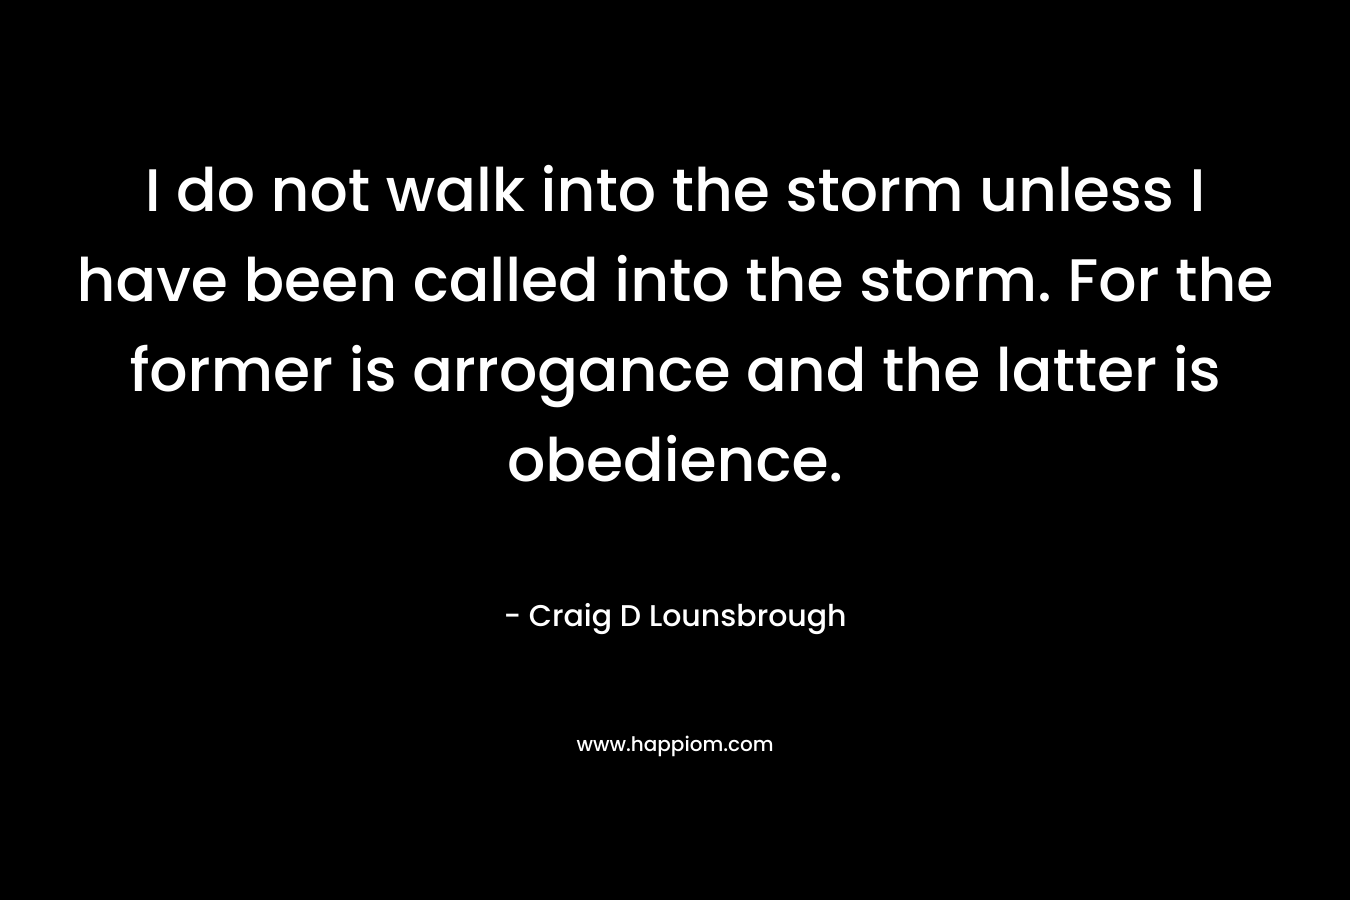 I do not walk into the storm unless I have been called into the storm. For the former is arrogance and the latter is obedience.